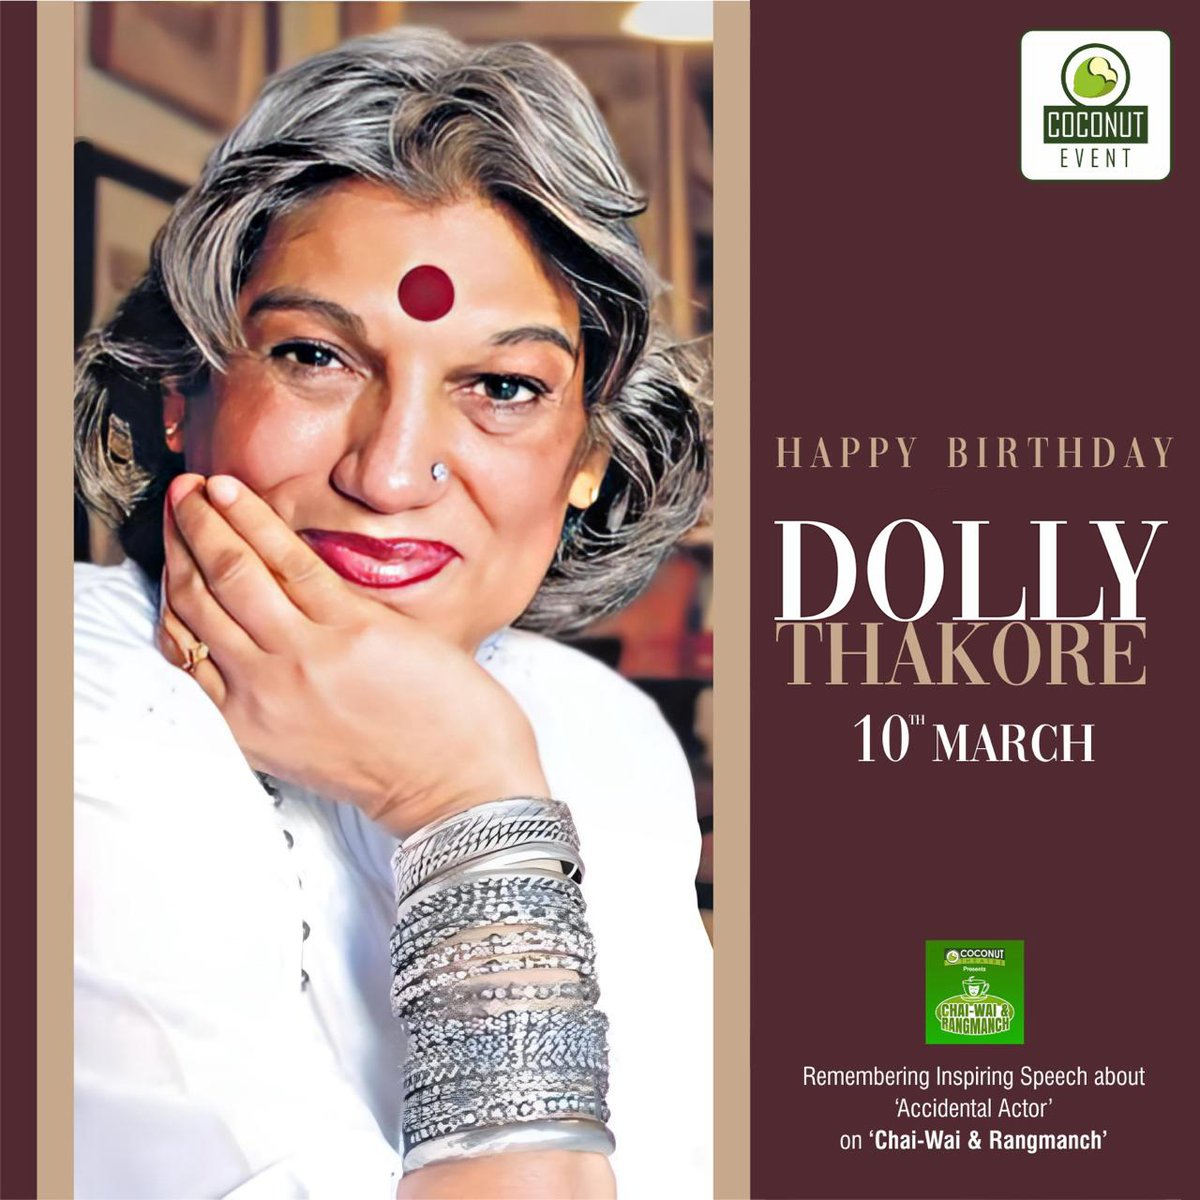 Your talent lights up the stage and inspires countless hearts. #CoconutEvent and #CoconutTheatre wish #DollyThakore an incredible #HappyBirthday!

#ChaiWaiAndRangmanch #BirthdayWishes #RashminMajithia #Celebration #BirthdayPost #HappyBirthdayToYou